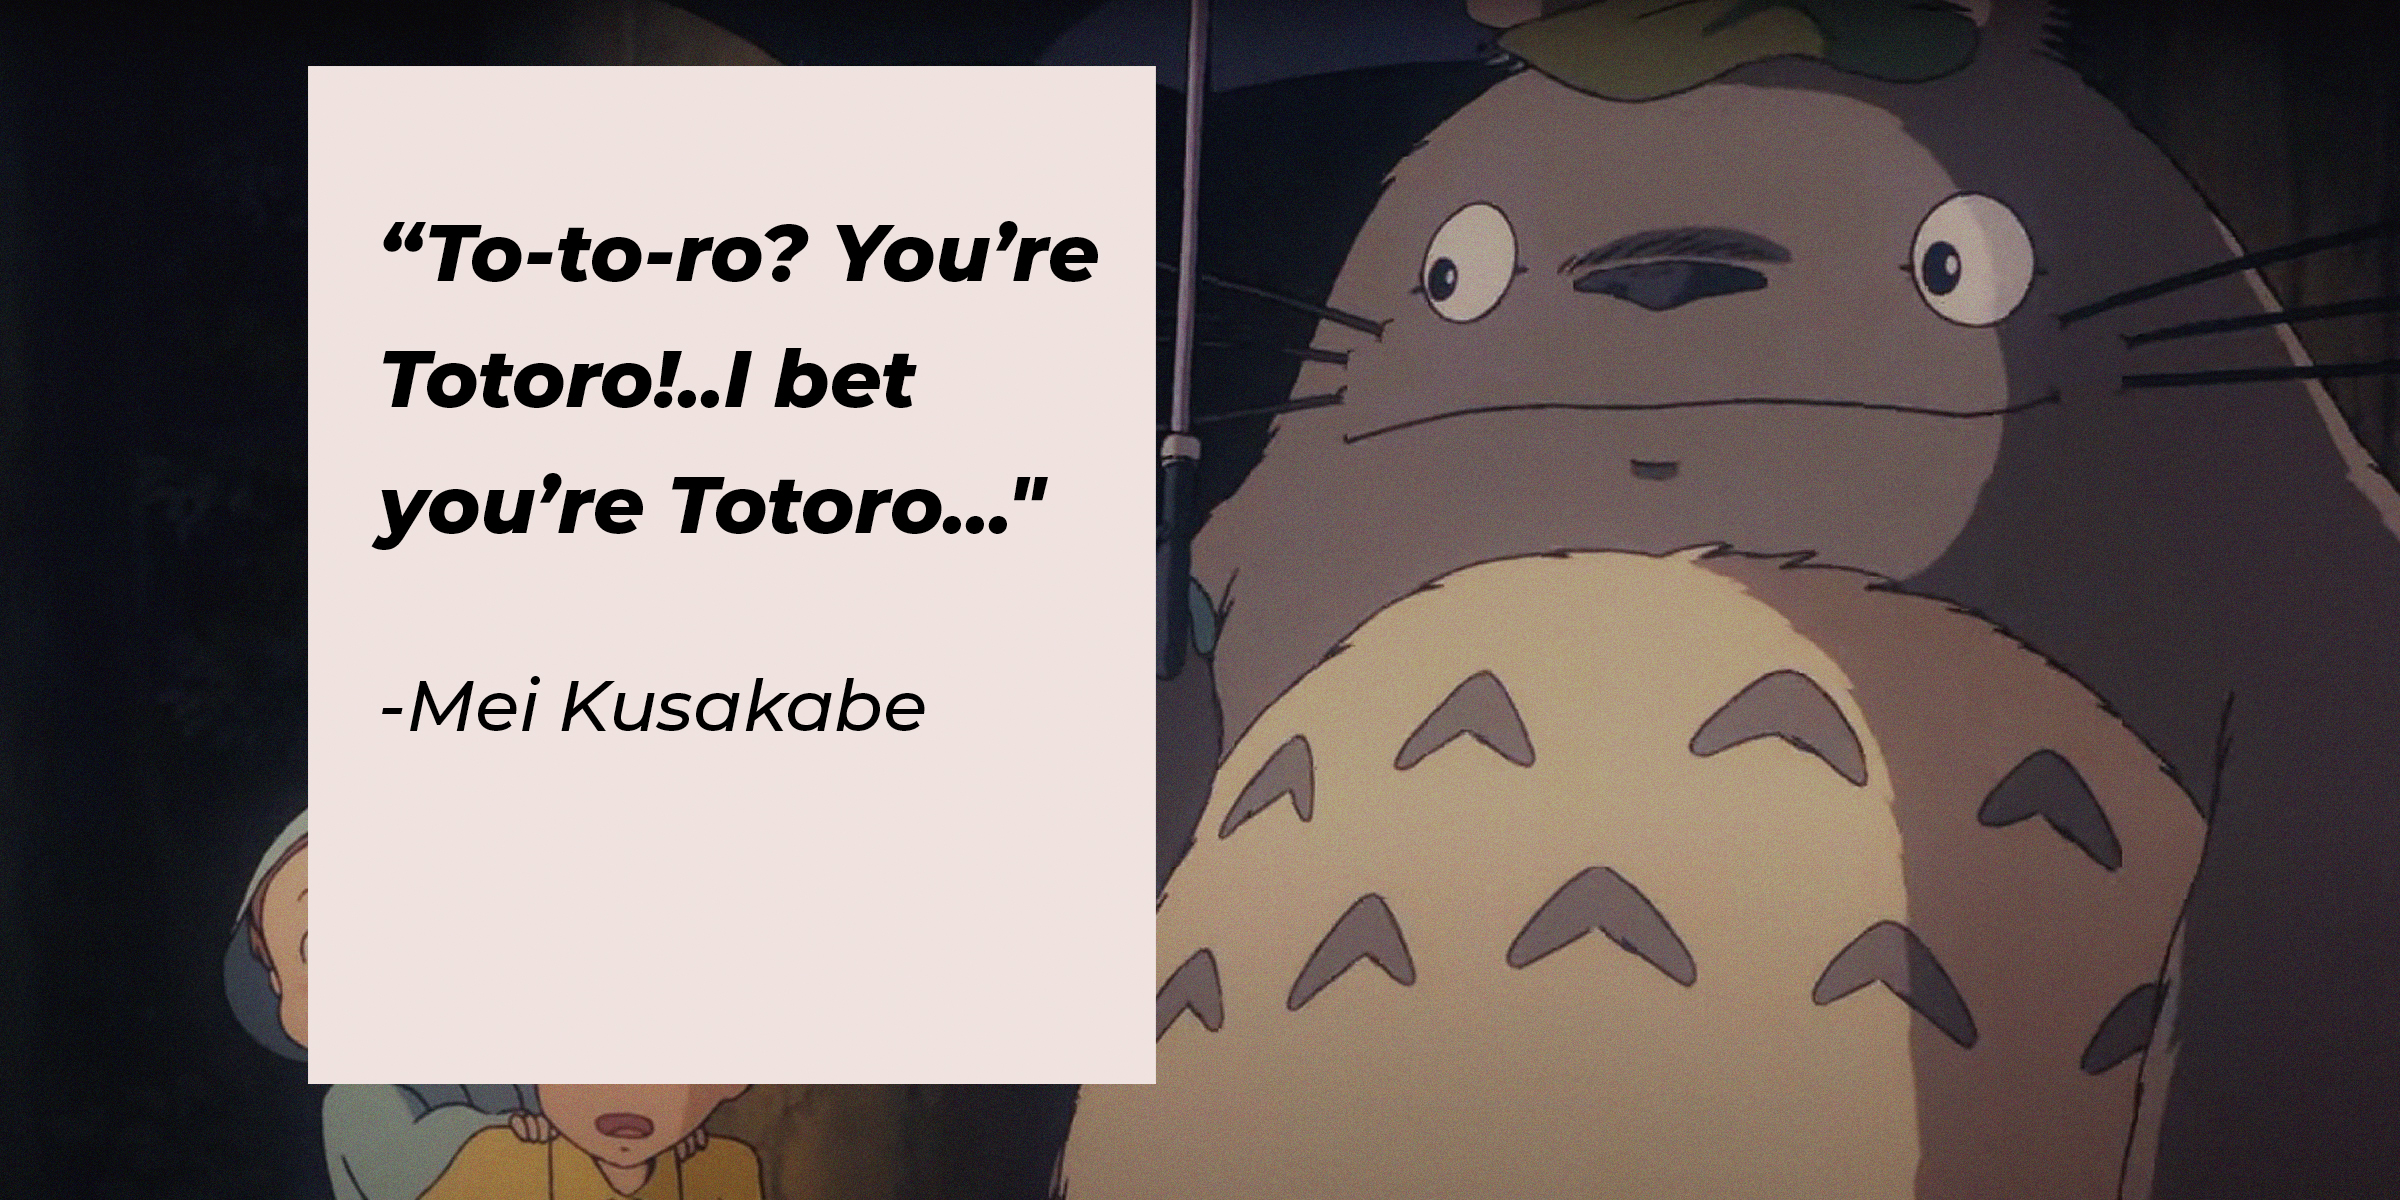 An image of Totoro Mei and Satsuki Kusakabe with Mei’s quote: “To-to-ro? You’re Totoro!..I bet you’re Totoro…" | Source: facebook.com/GhibliUSA